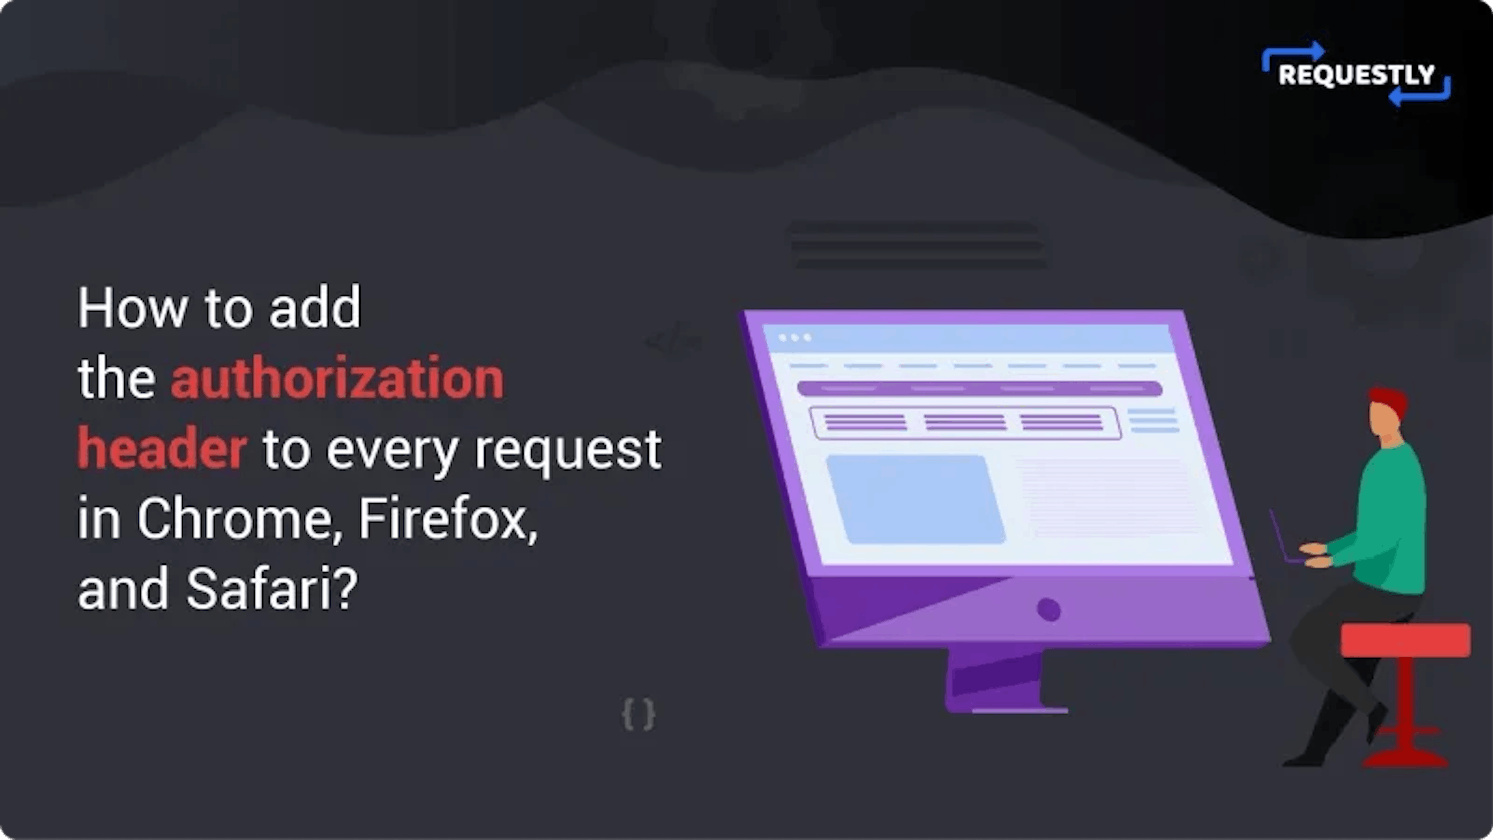 How to add the authorization header to every request in Chrome, Firefox, and Safari?